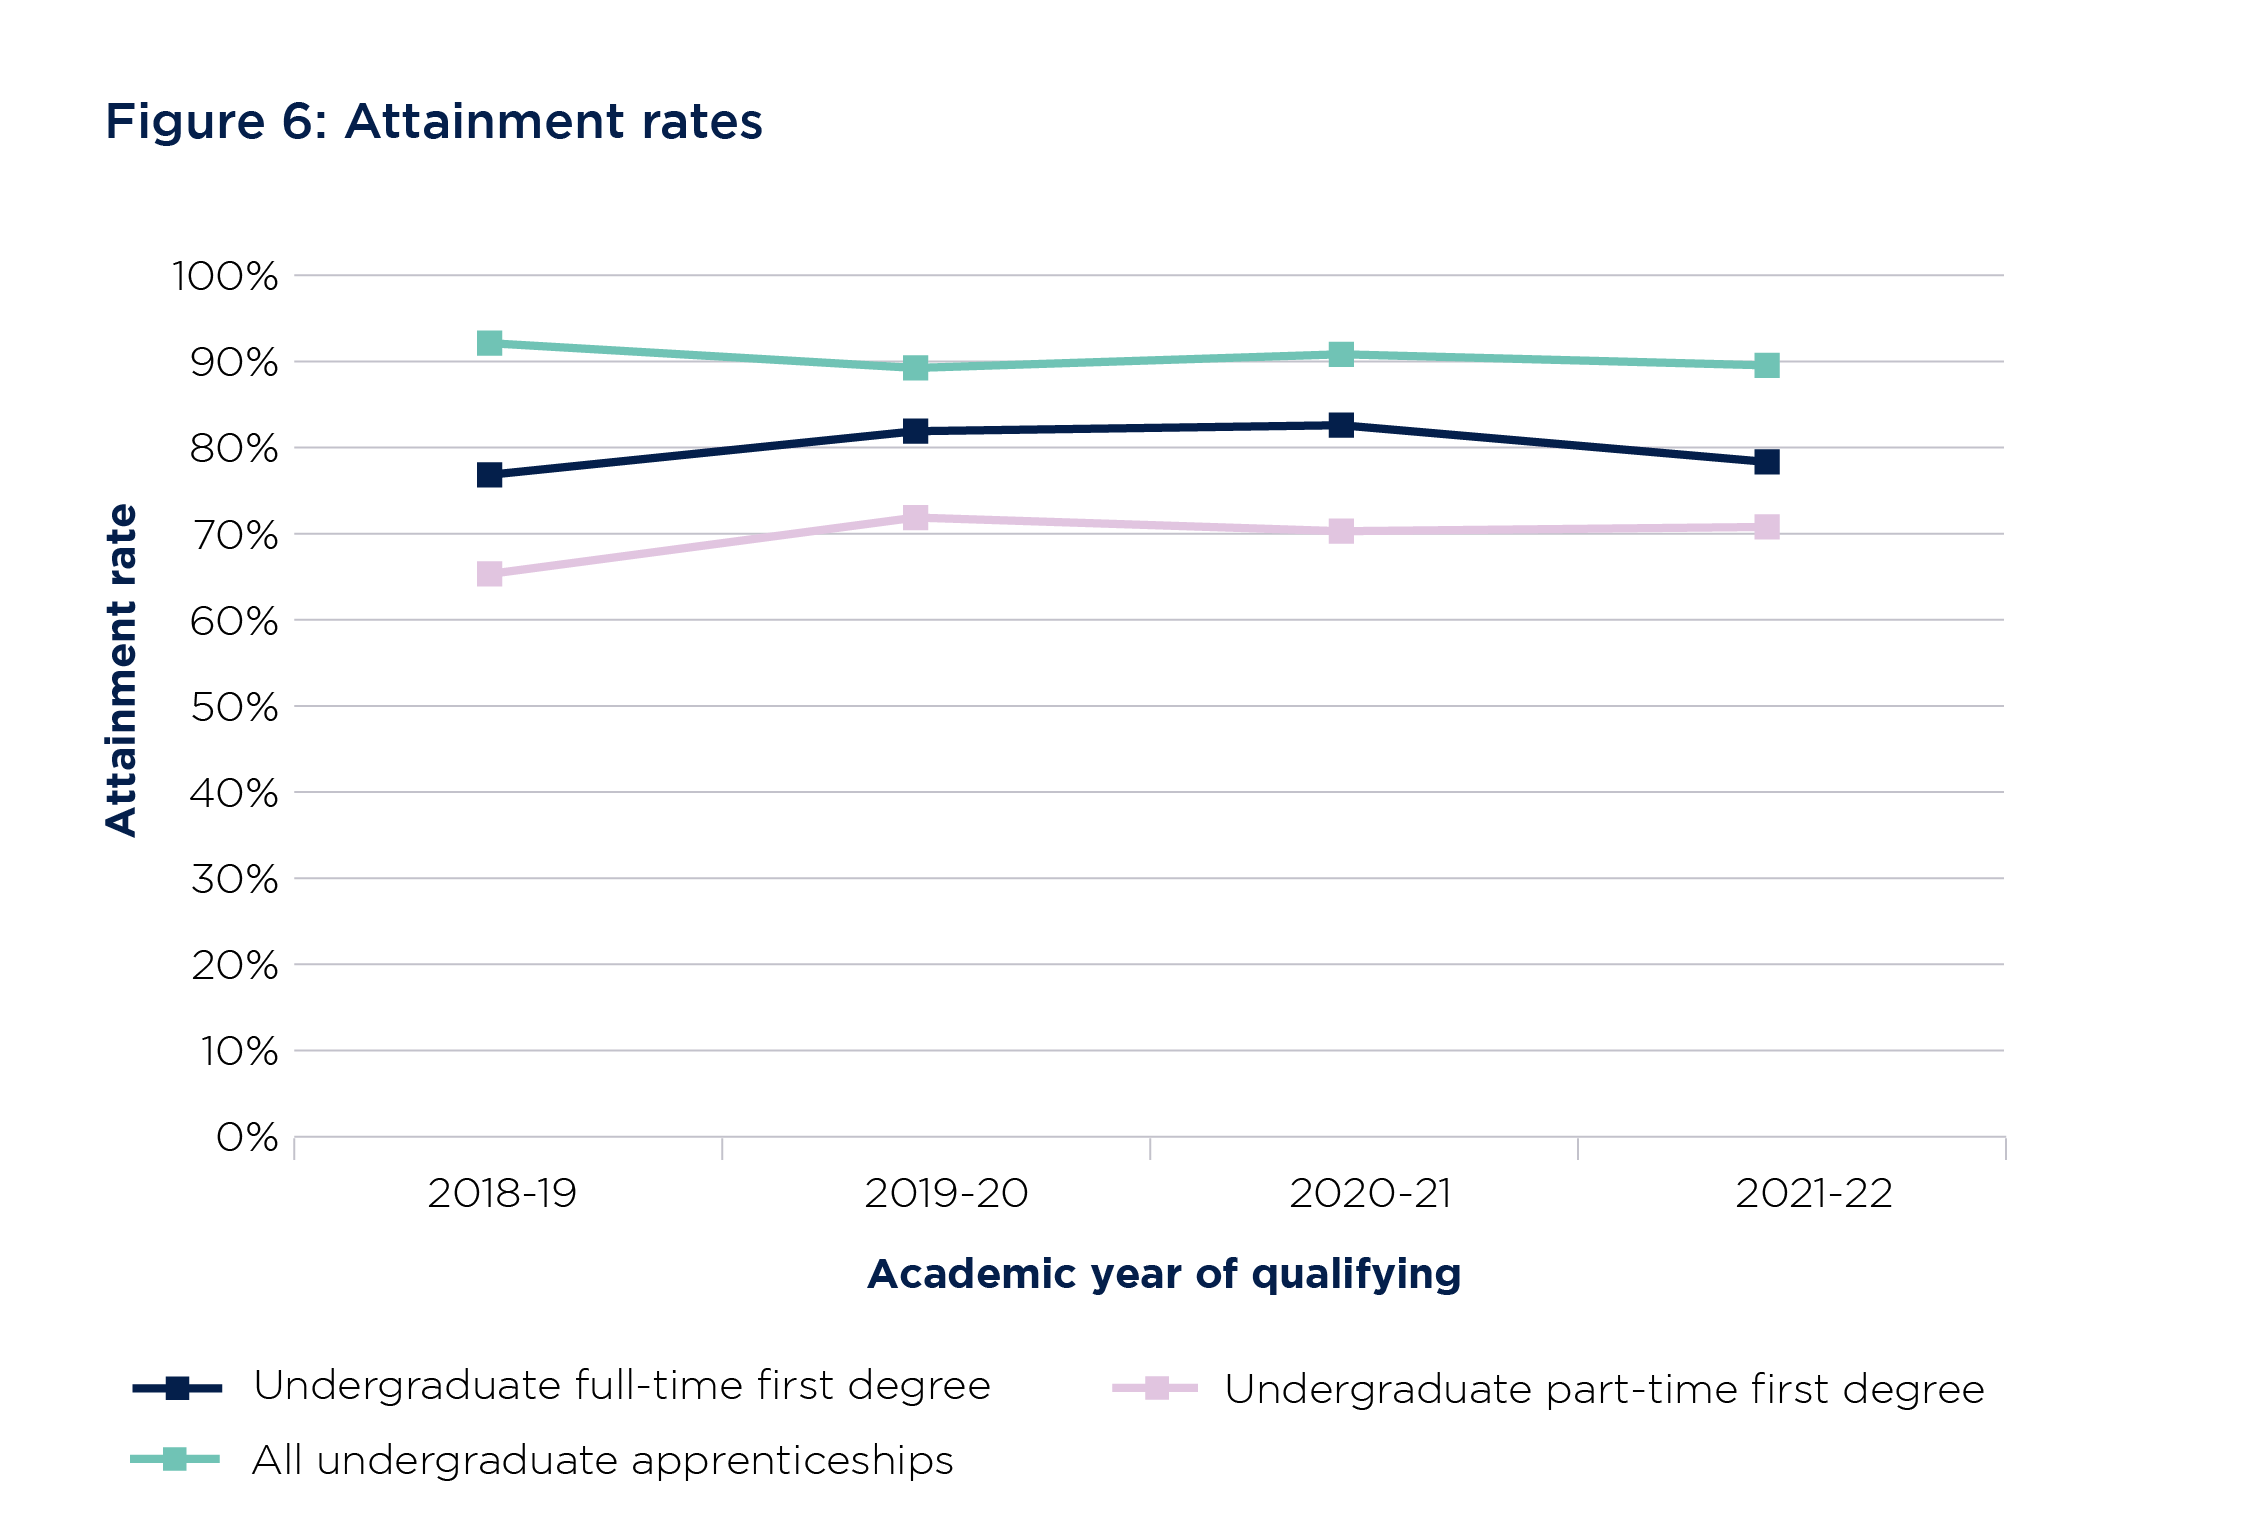 Figure 6 is a triple line graph showing attainment rates as a percentage for the years of qualifying 2018-19 to 2021-22 for the following groups of students: undergraduate full-time first degree, undergraduate part-time first degree, and all undergraduate apprenticeships. While the attainment rates for undergraduate apprenticeships have remained roughly steady over time, the attainment rates for both full-time and part-time undergraduate first degree qualifiers increased between 2018-19 and 2019-20. The highest completions rates are for all undergraduate apprenticeships, whereas the lowest are for undergraduate part-time first degree.